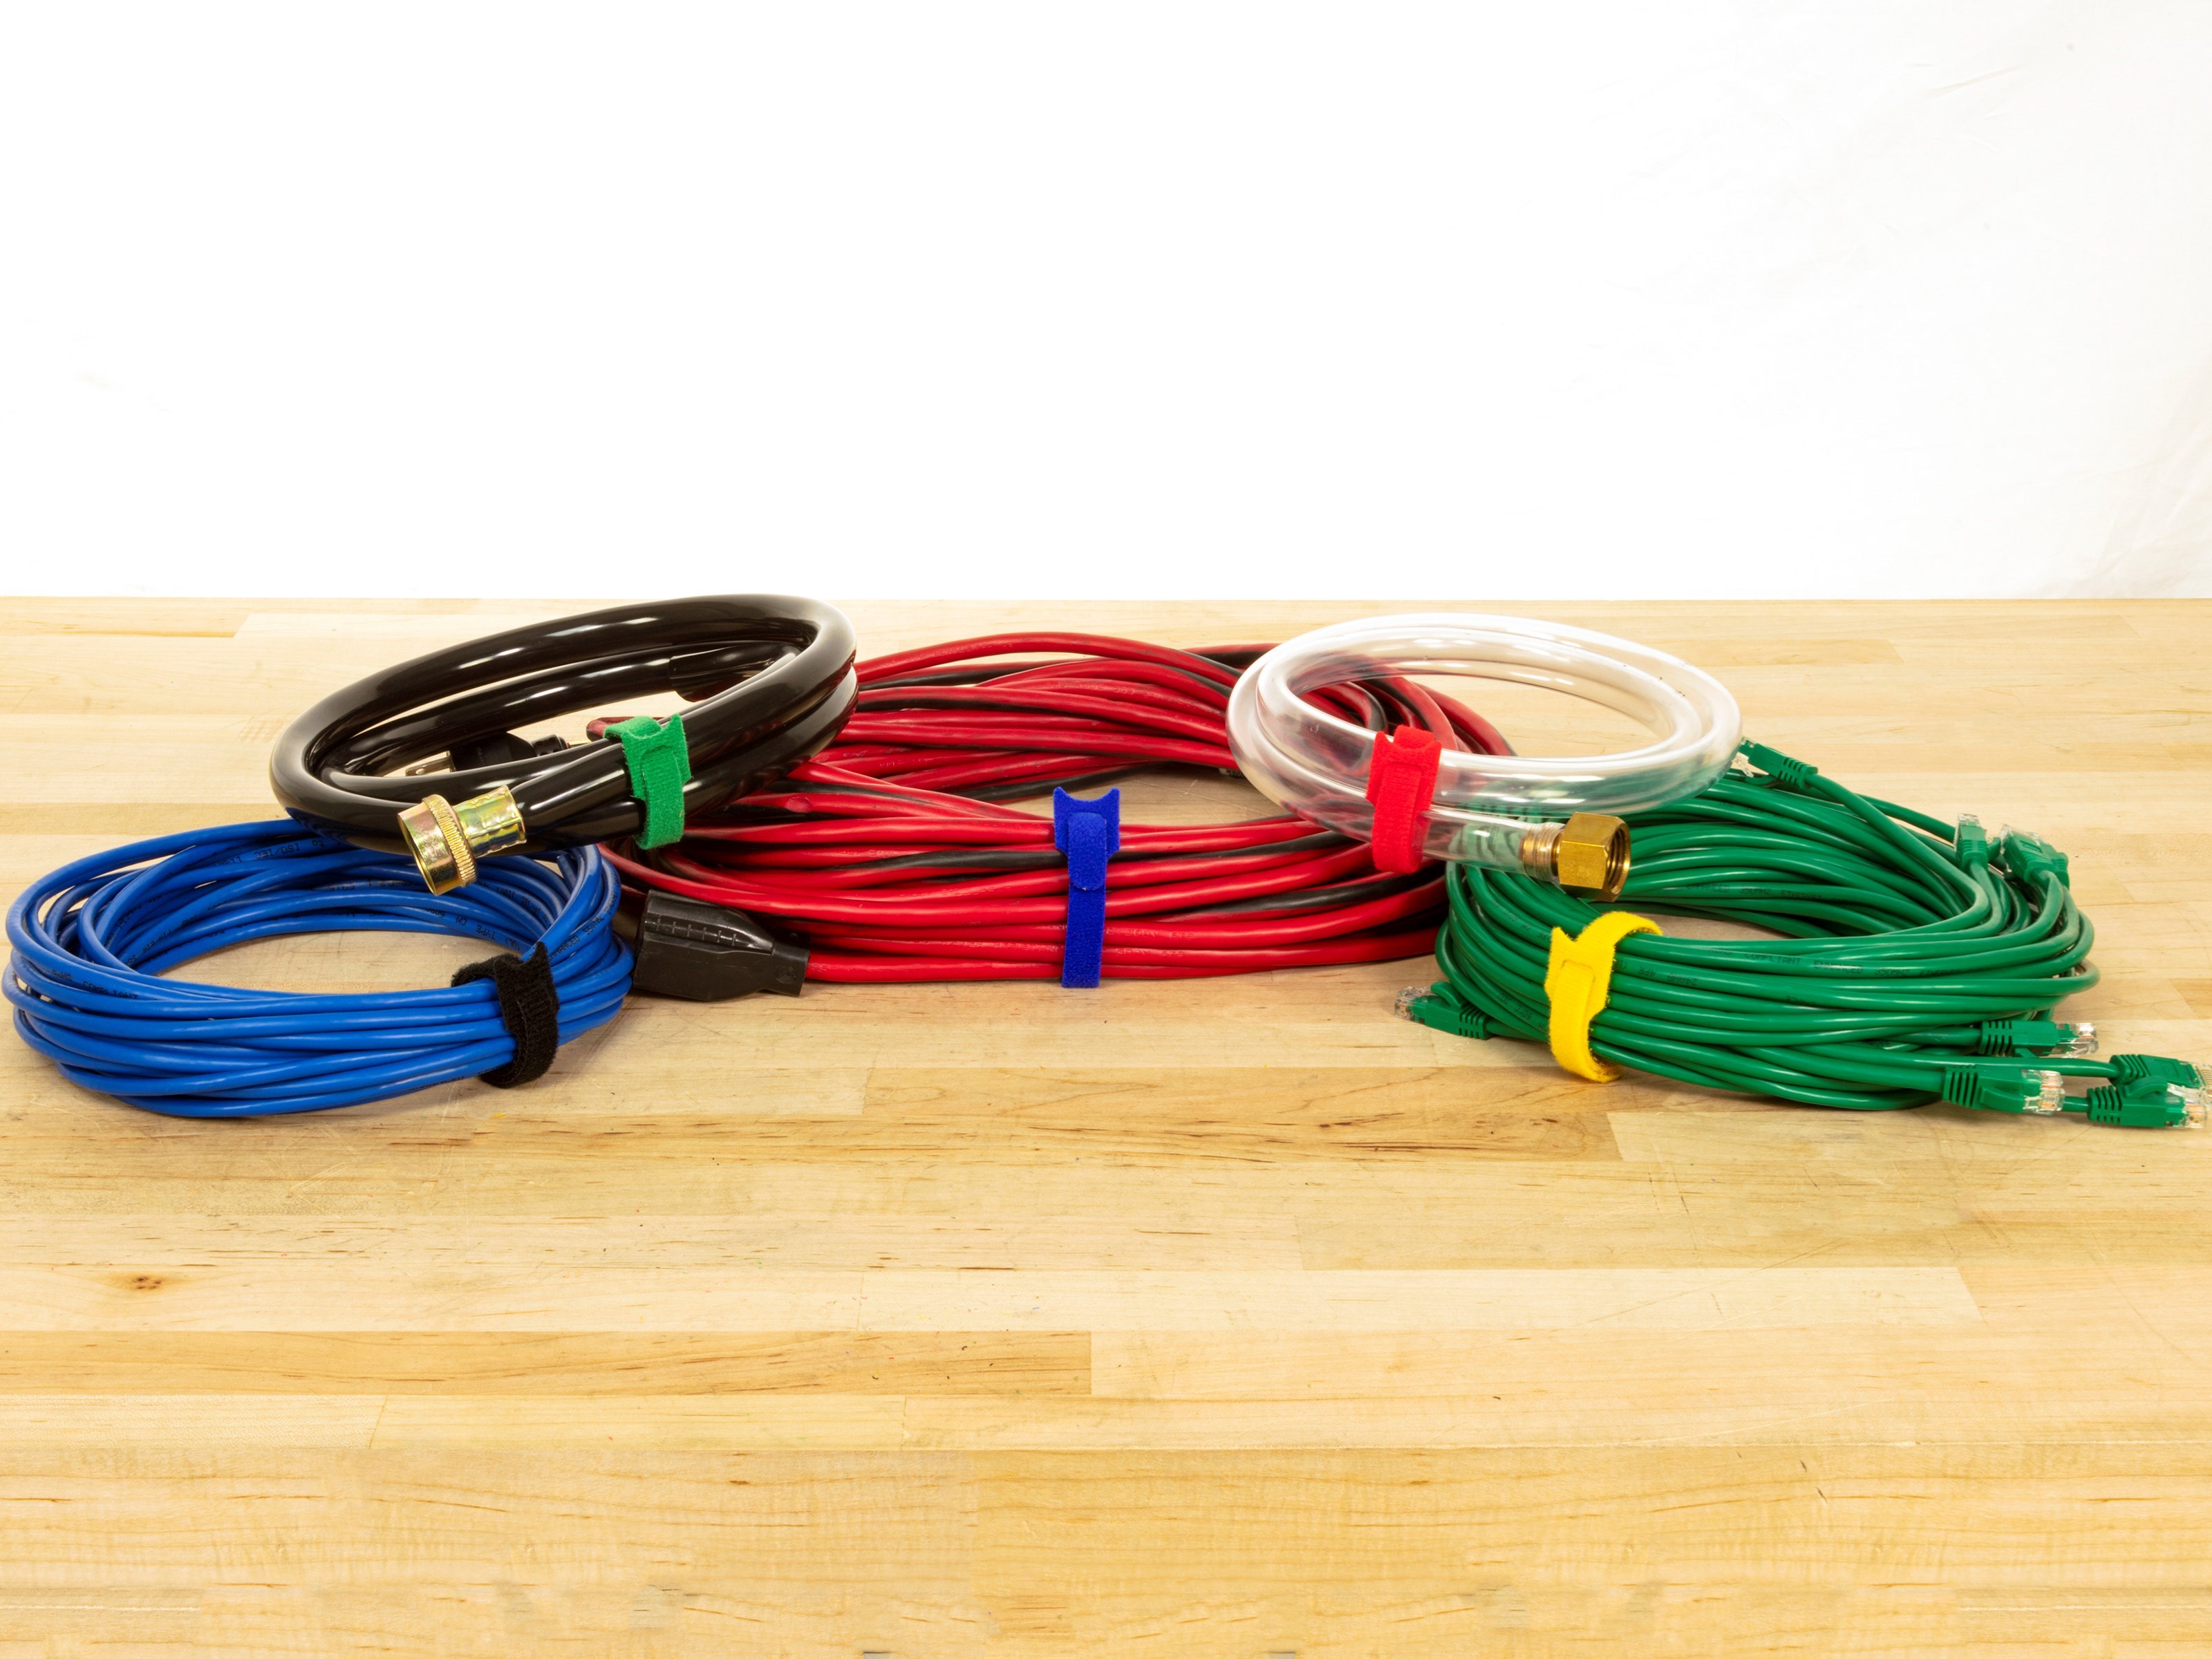 12 Inch Multi-colored Reuseable Tie Wrap - 50 Pack - Secure™ Cable